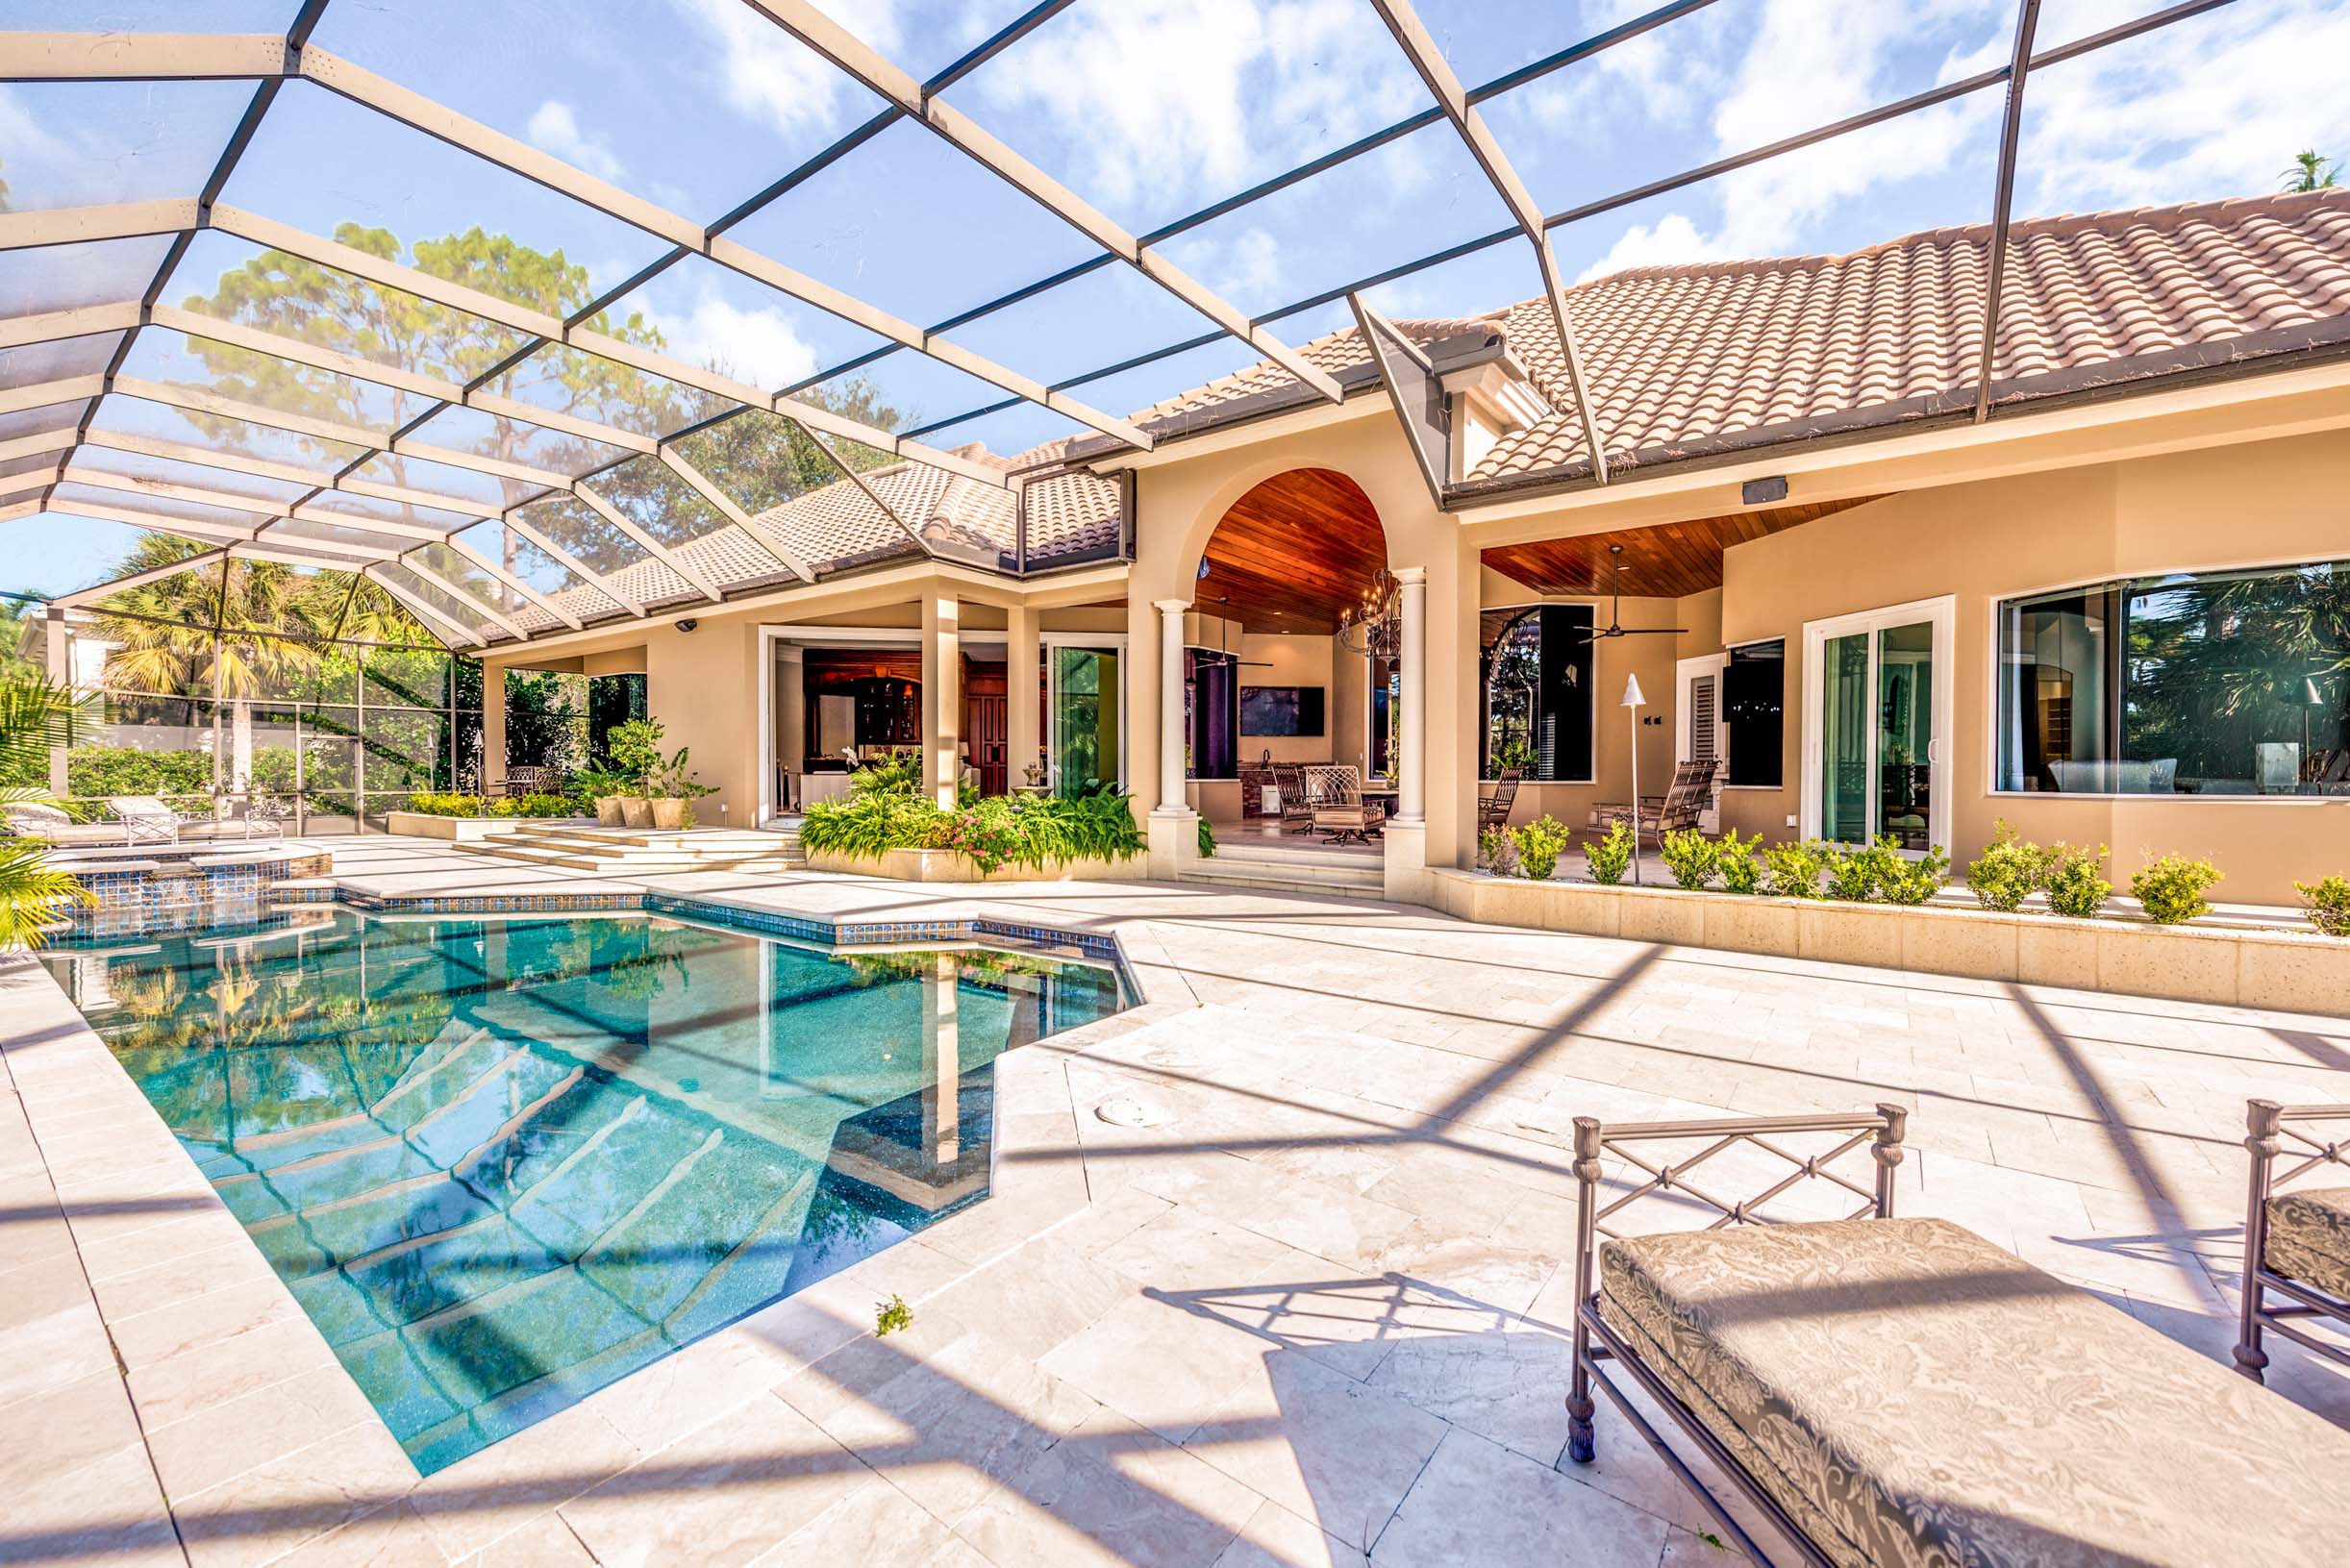 2716 Buckthorn Way - Mansion Backyard Pool and Lounge Area with View to Estate